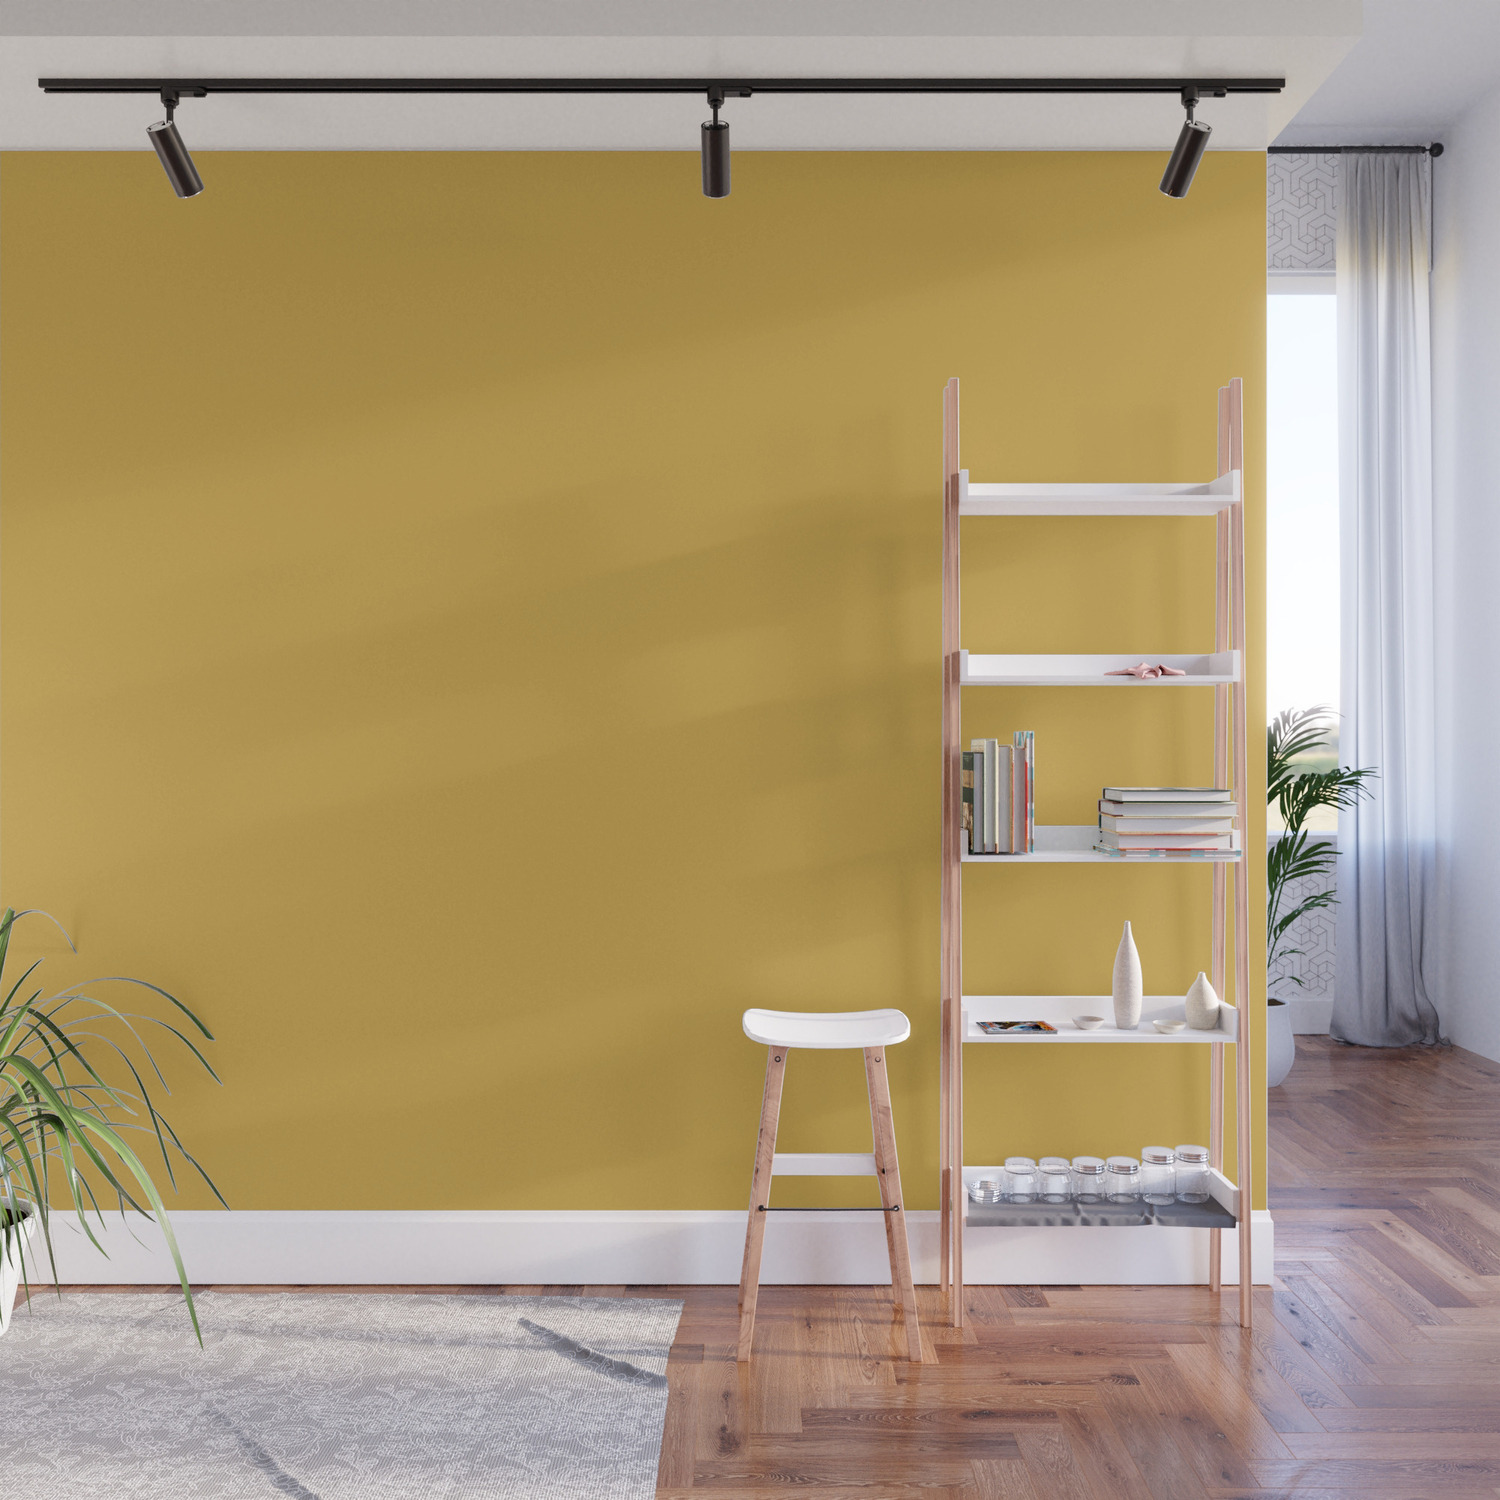 Sherwin Williams Trending Colors Of 2019 Nugget Golden Yellow Sw 6697 Solid Color Wall Mural